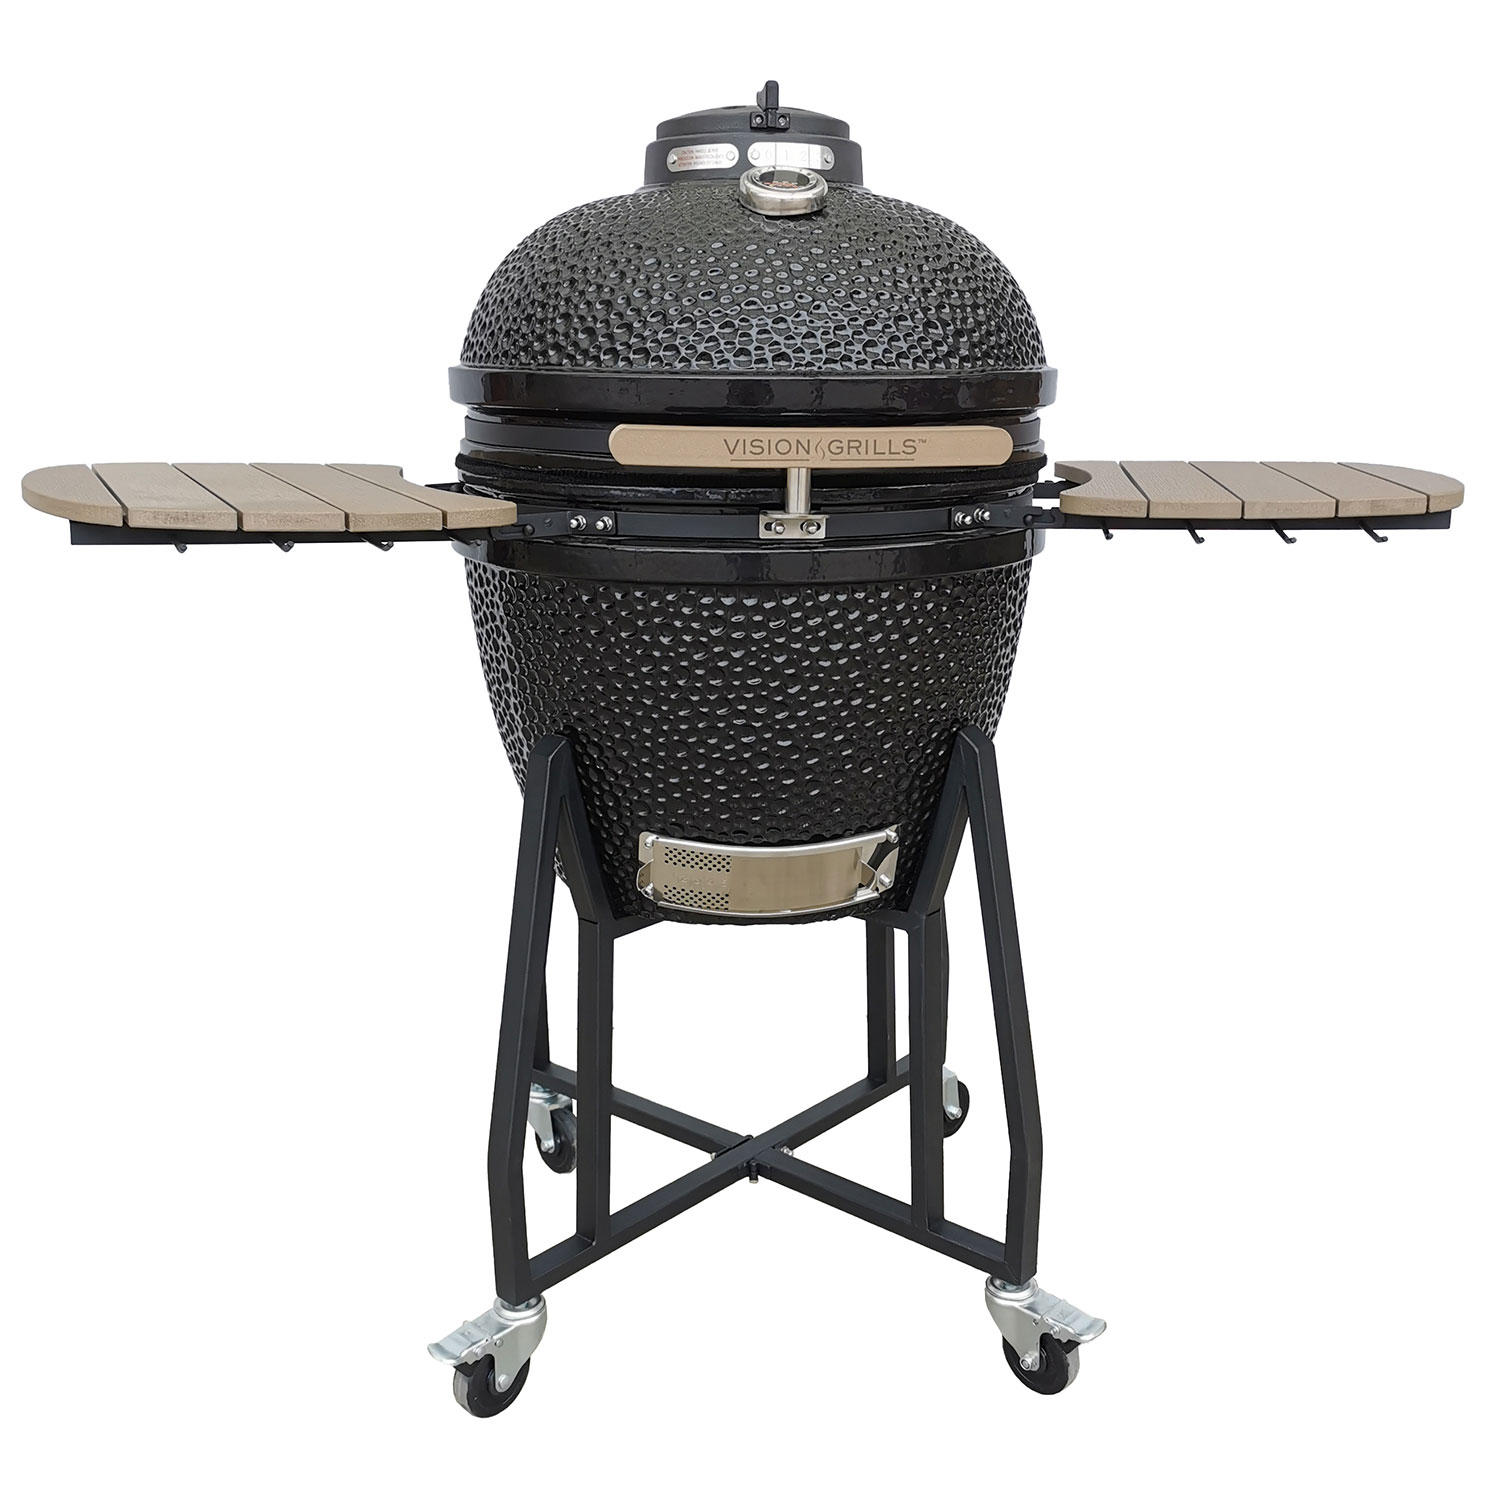 Vision Grills 1-Series Kamado Grill with Cover (Black)